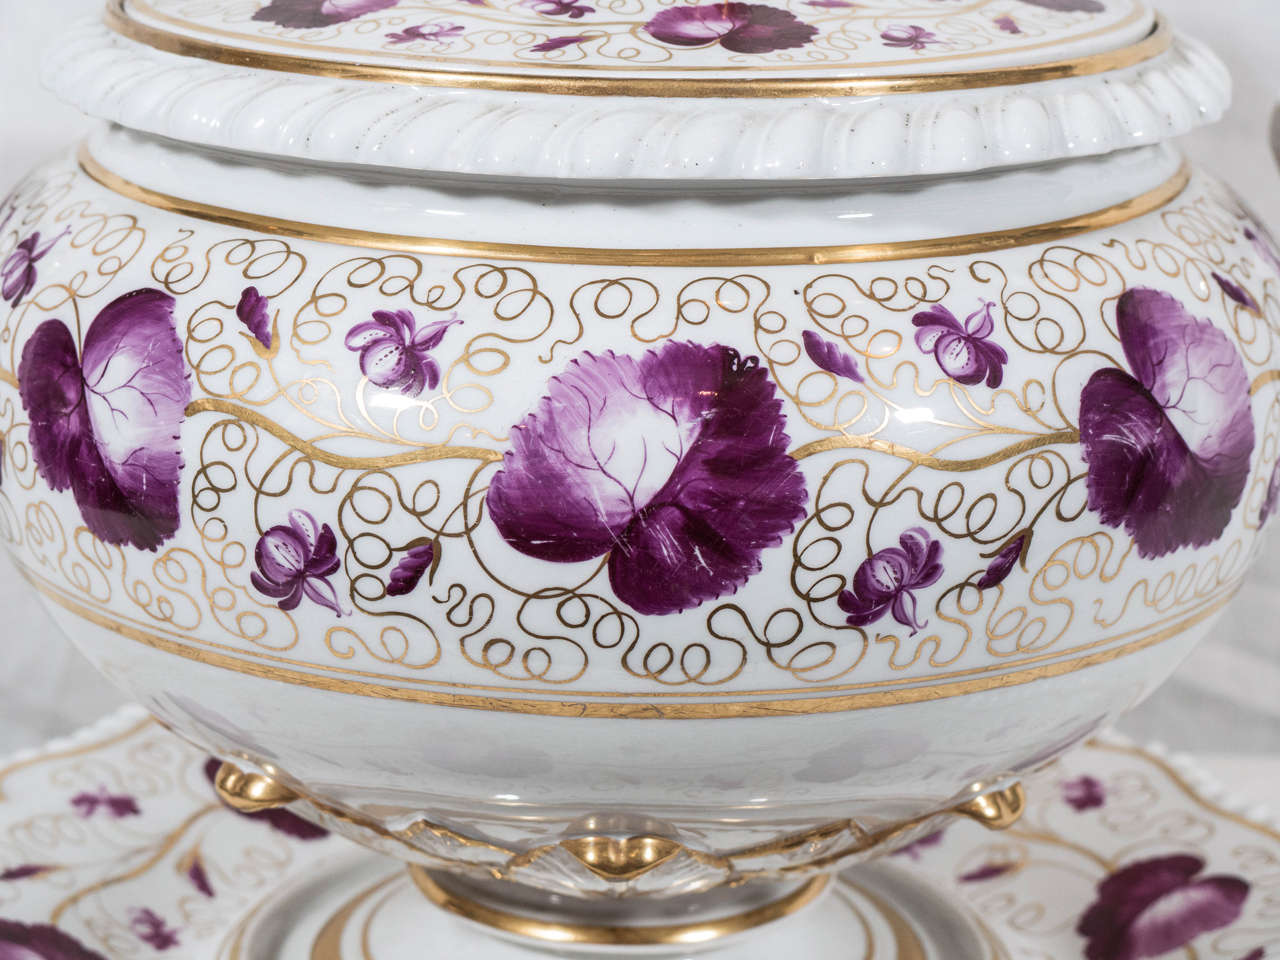 A Flight, Barr, Barr Worcester Porcelain round soup tureen and stand beautifully decorated in purple and gilt with leaves and scrolling vines.The cover and stand both have the unique Worcester gadrooned edge. 
 Marked with the Worcester impressed